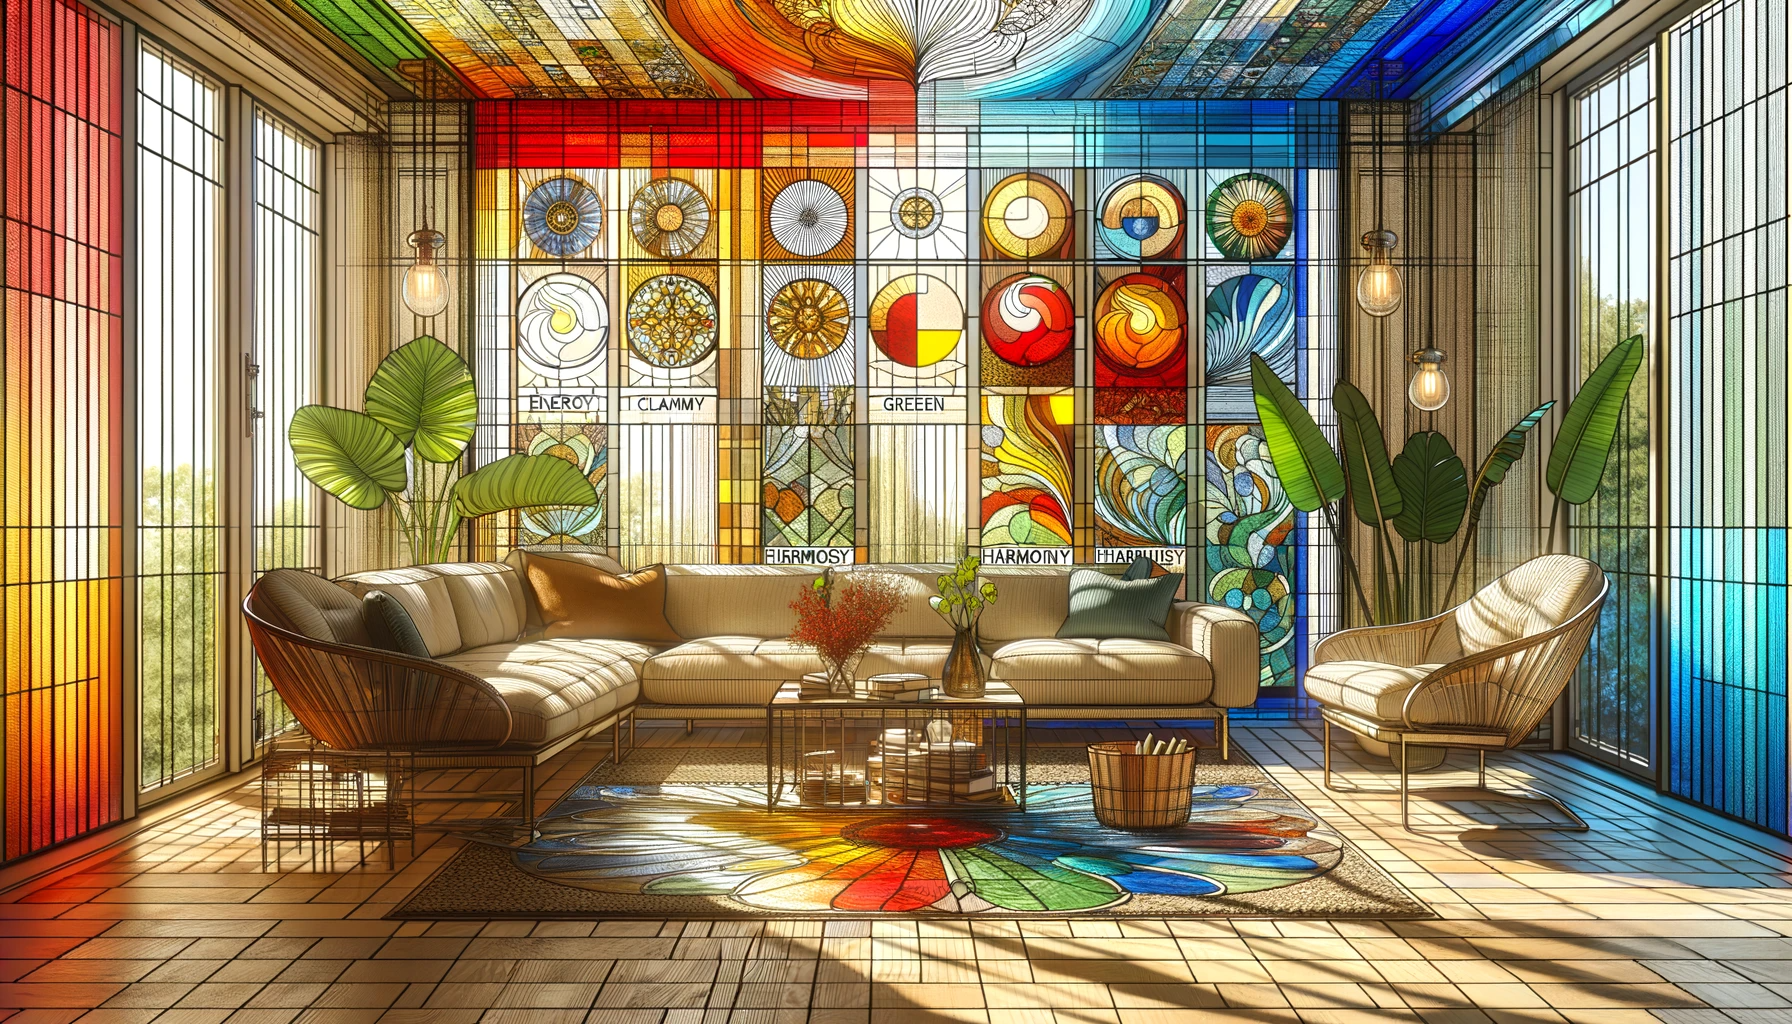 Stained glass is not just a visual delight